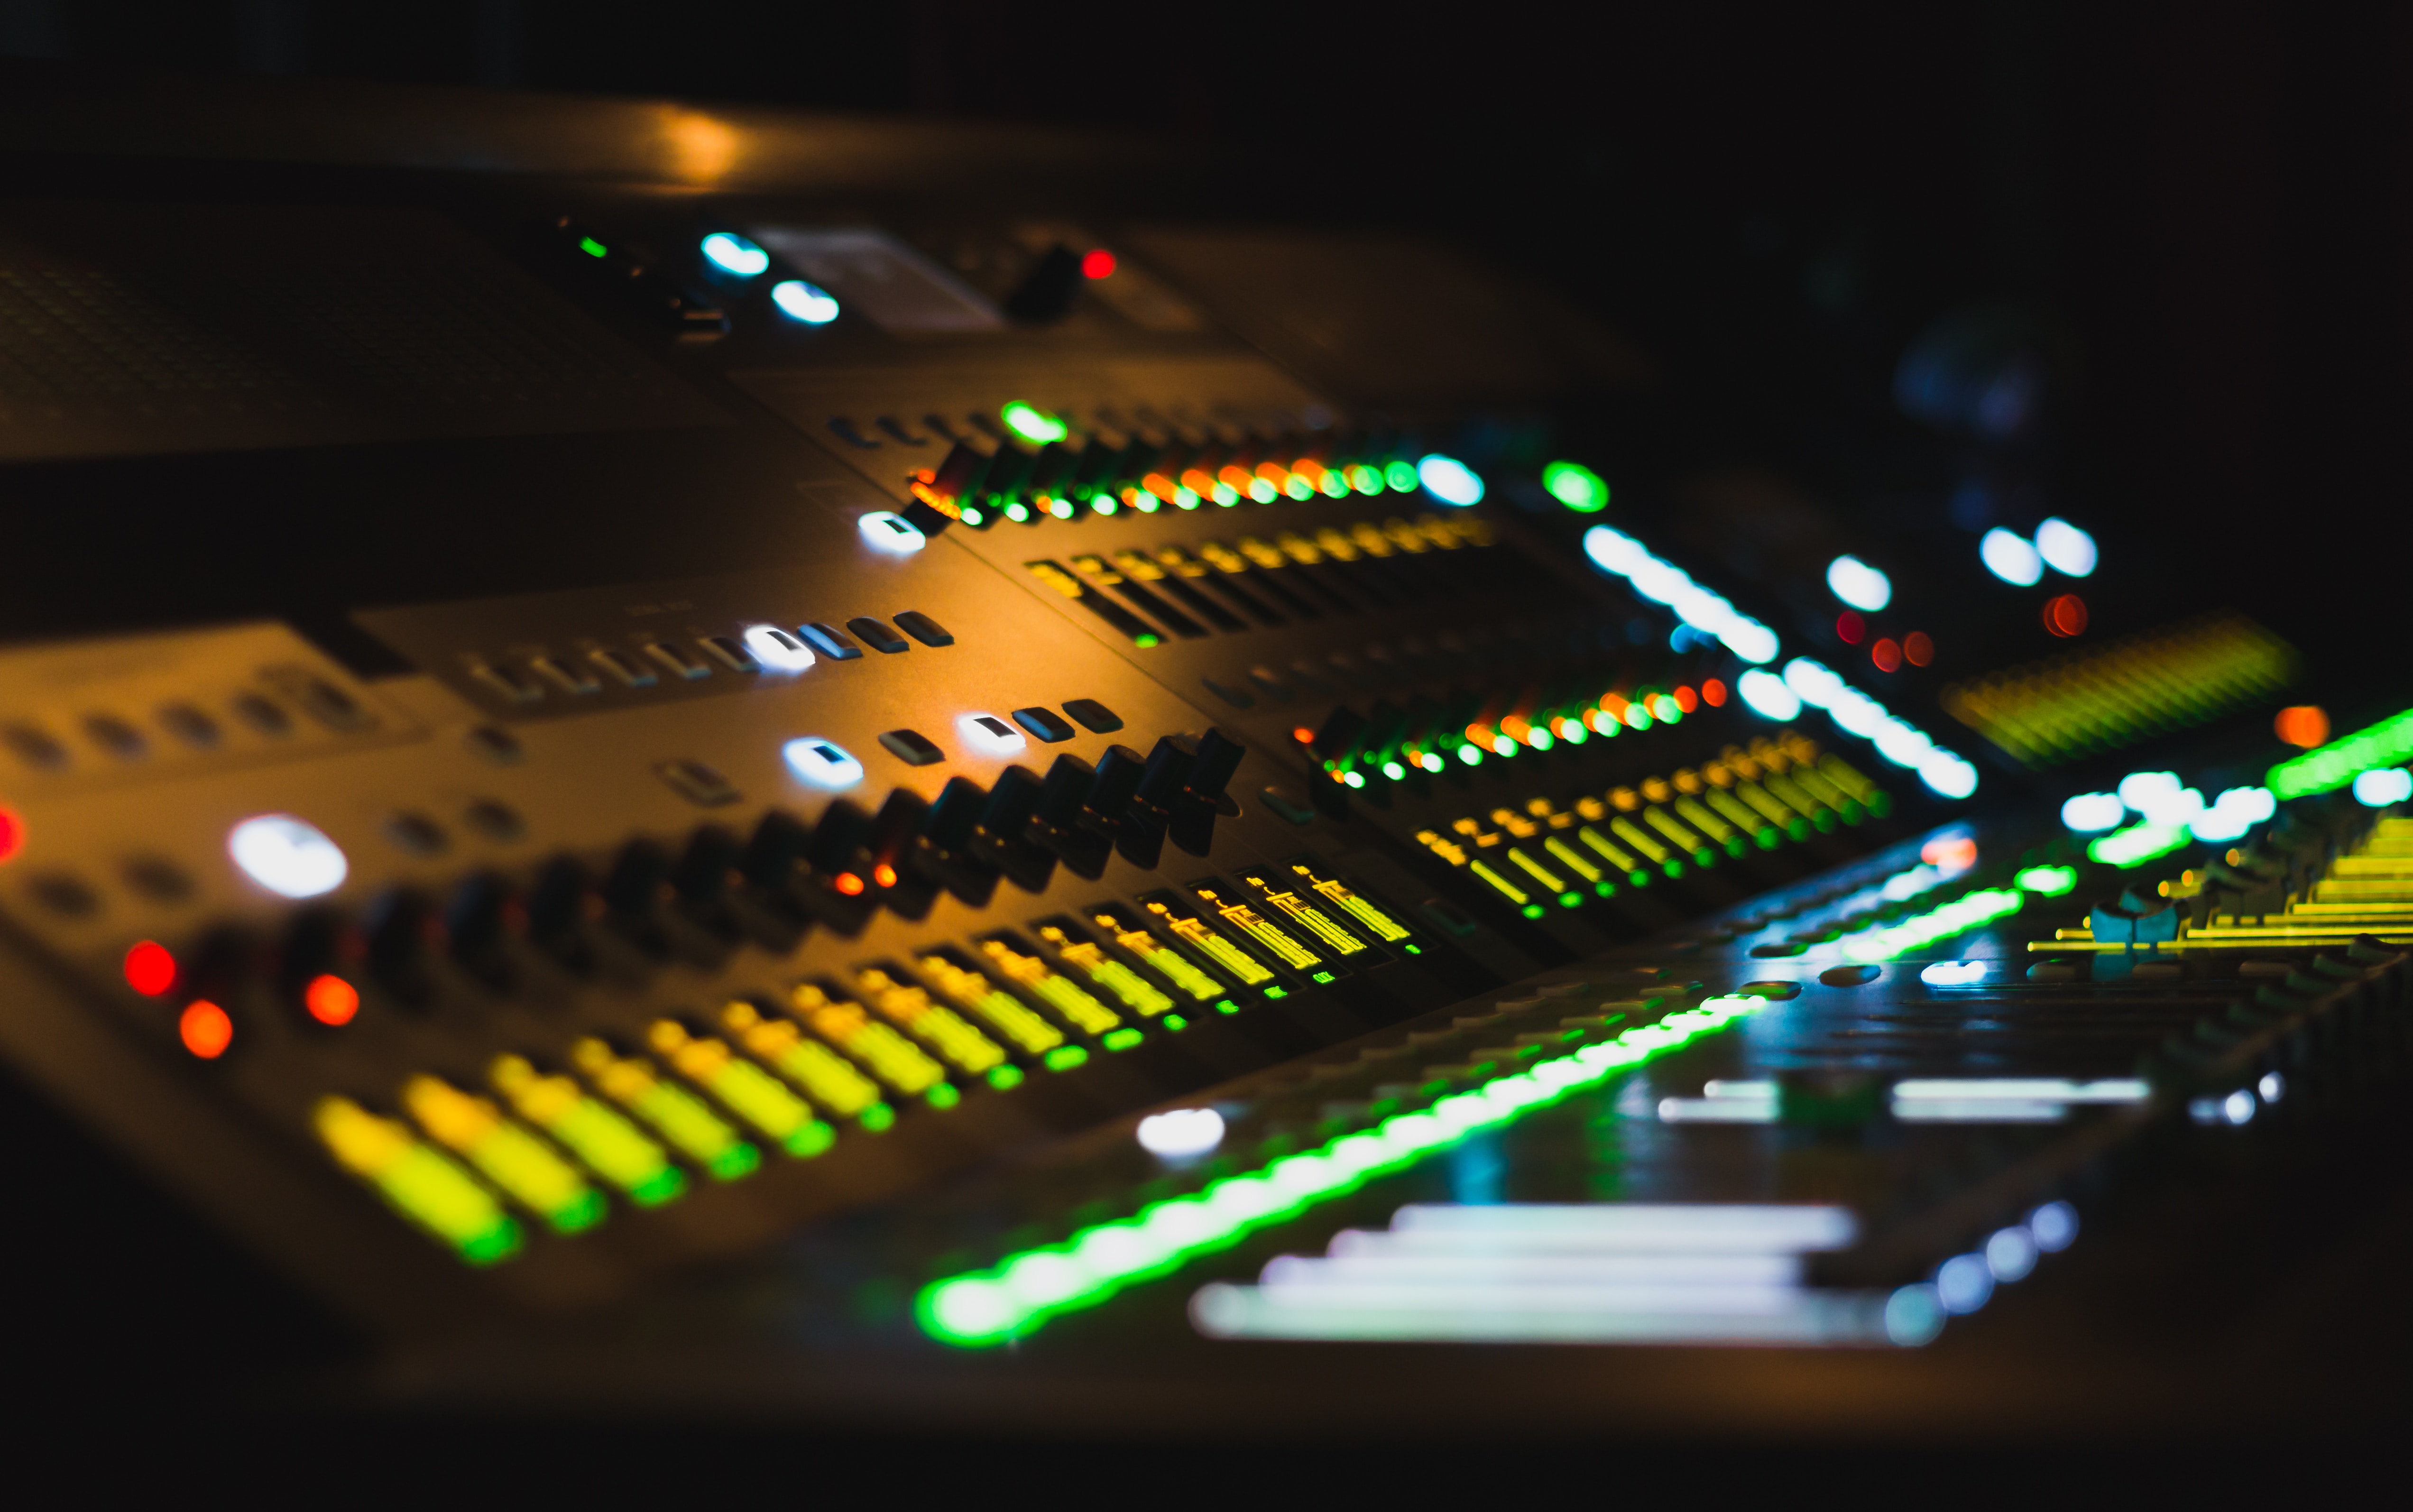 music, equalizer, mixer, device, electronics, remote controller, desk phone wallpaper